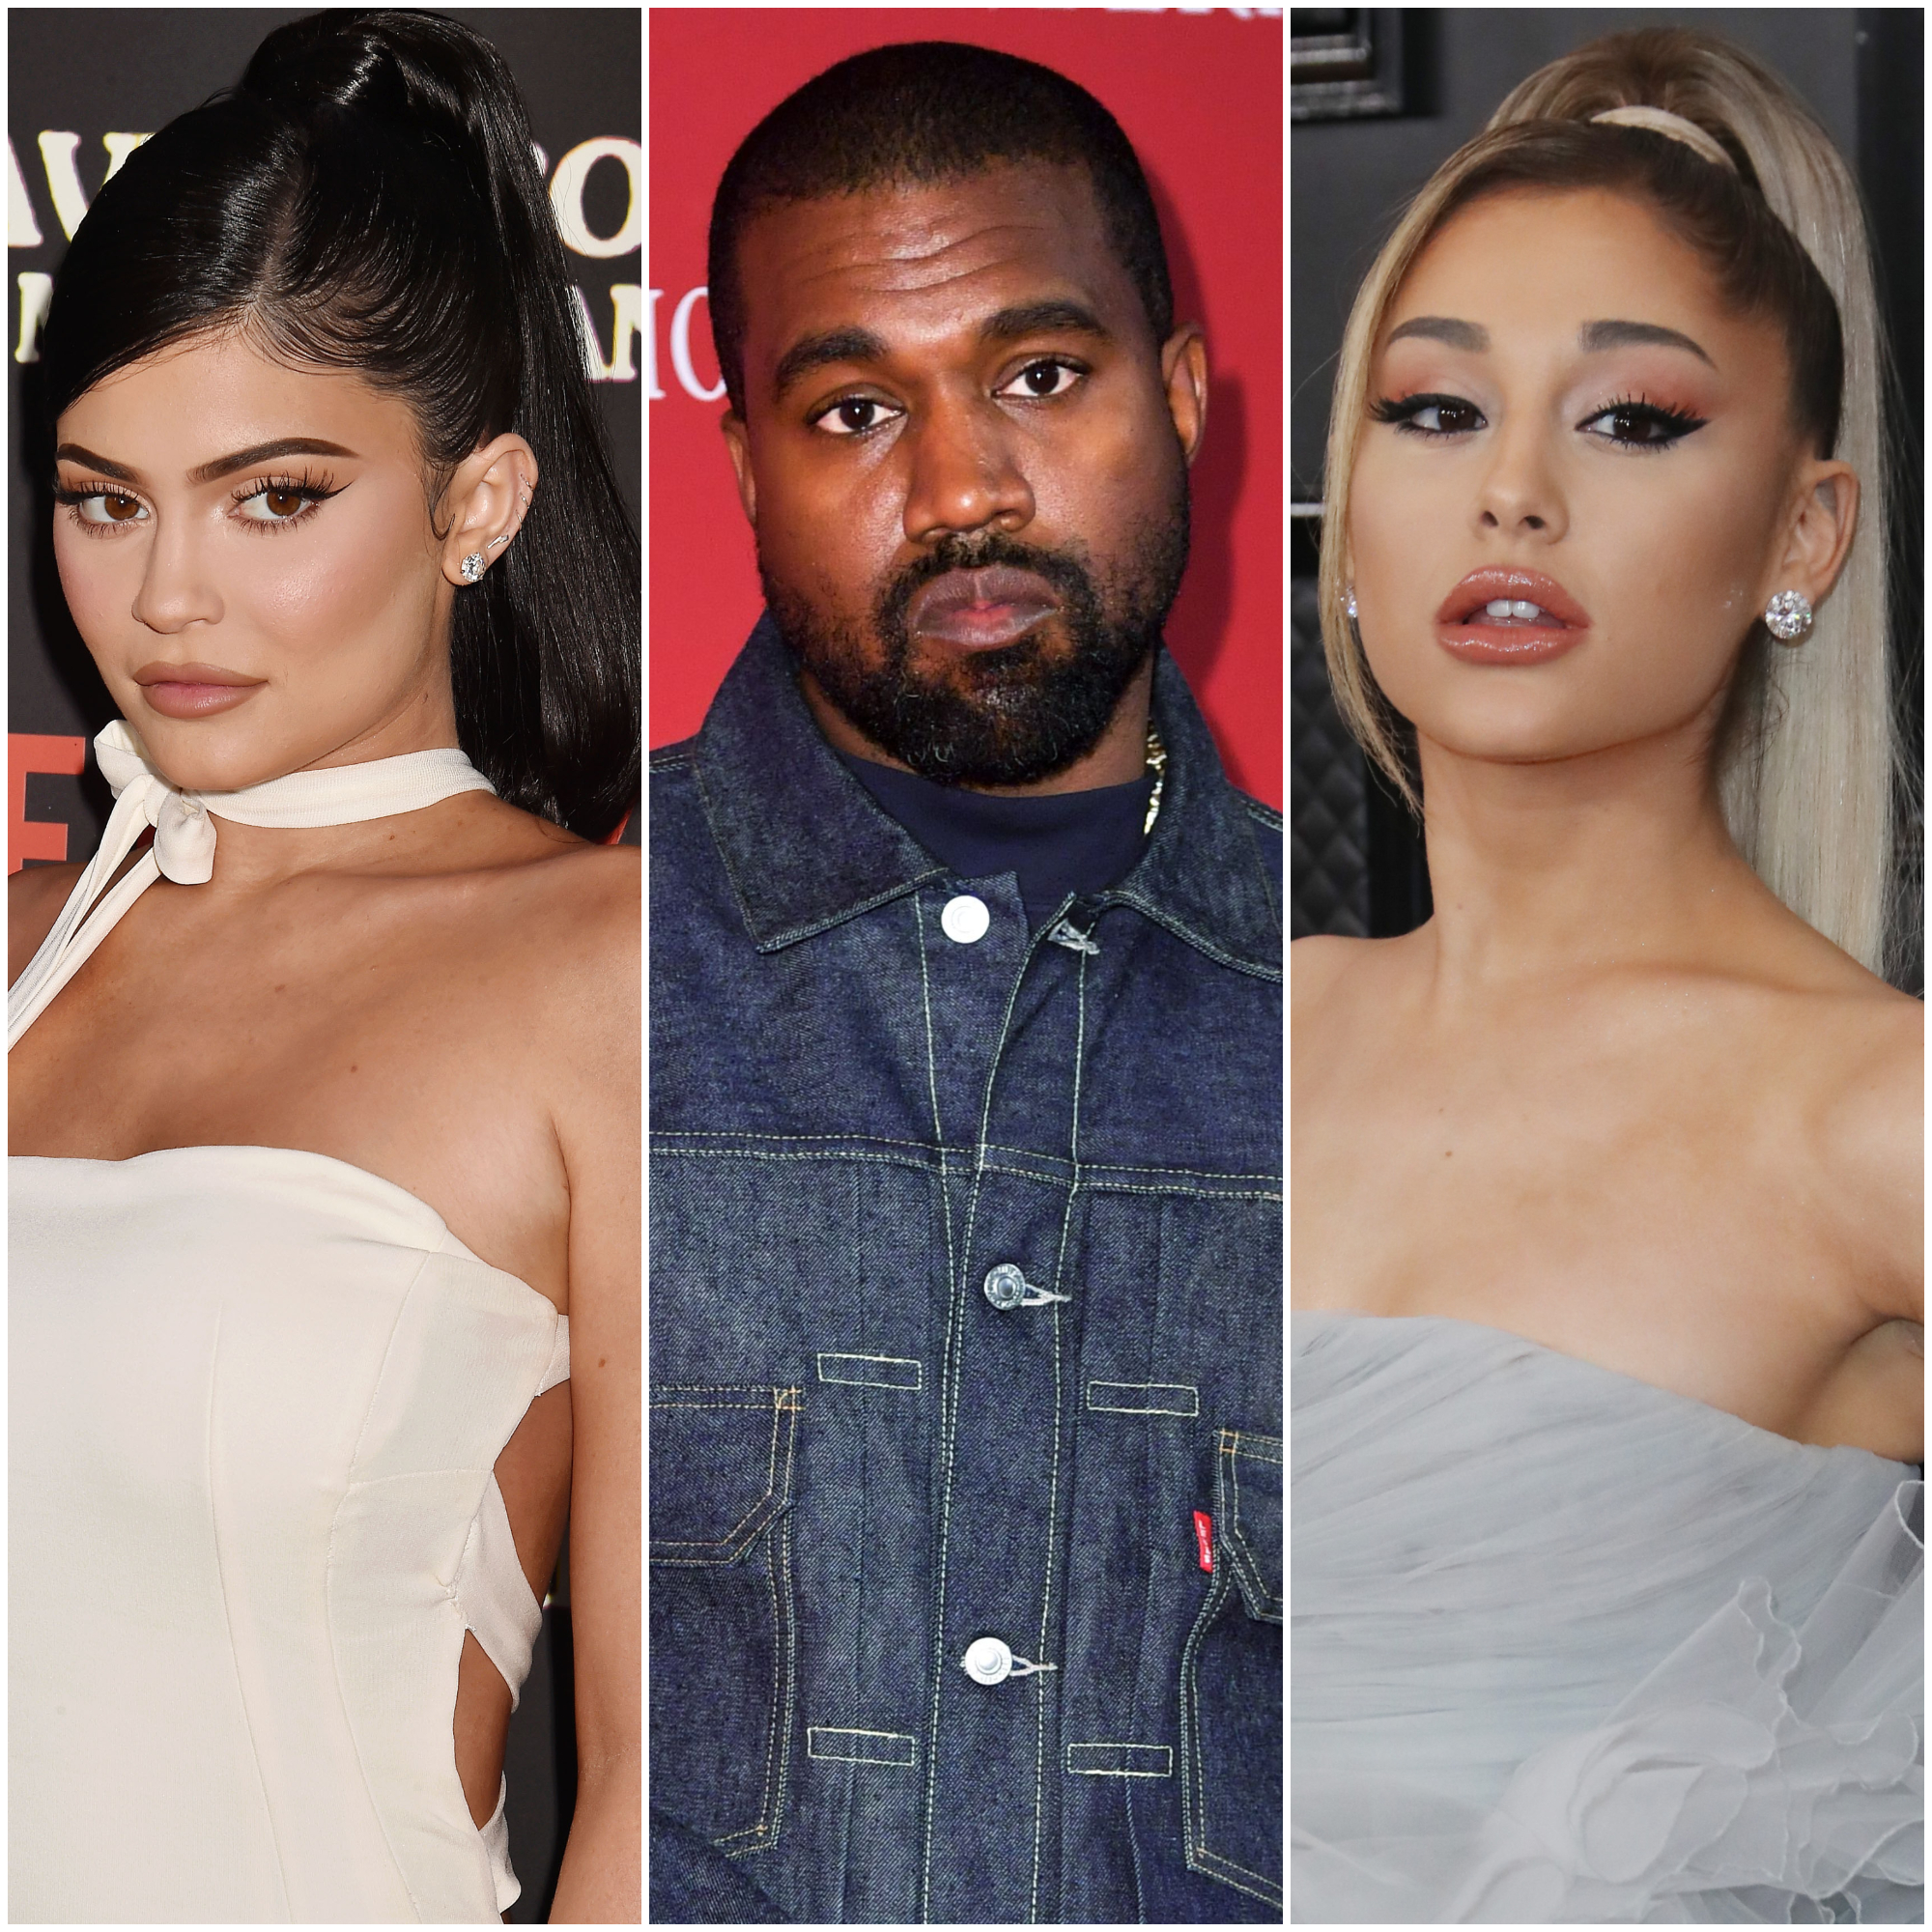 Celebrity Porn Ariana Grande - The Highest-Paid Celebrities in 2020 Include Athletes, Singers and More